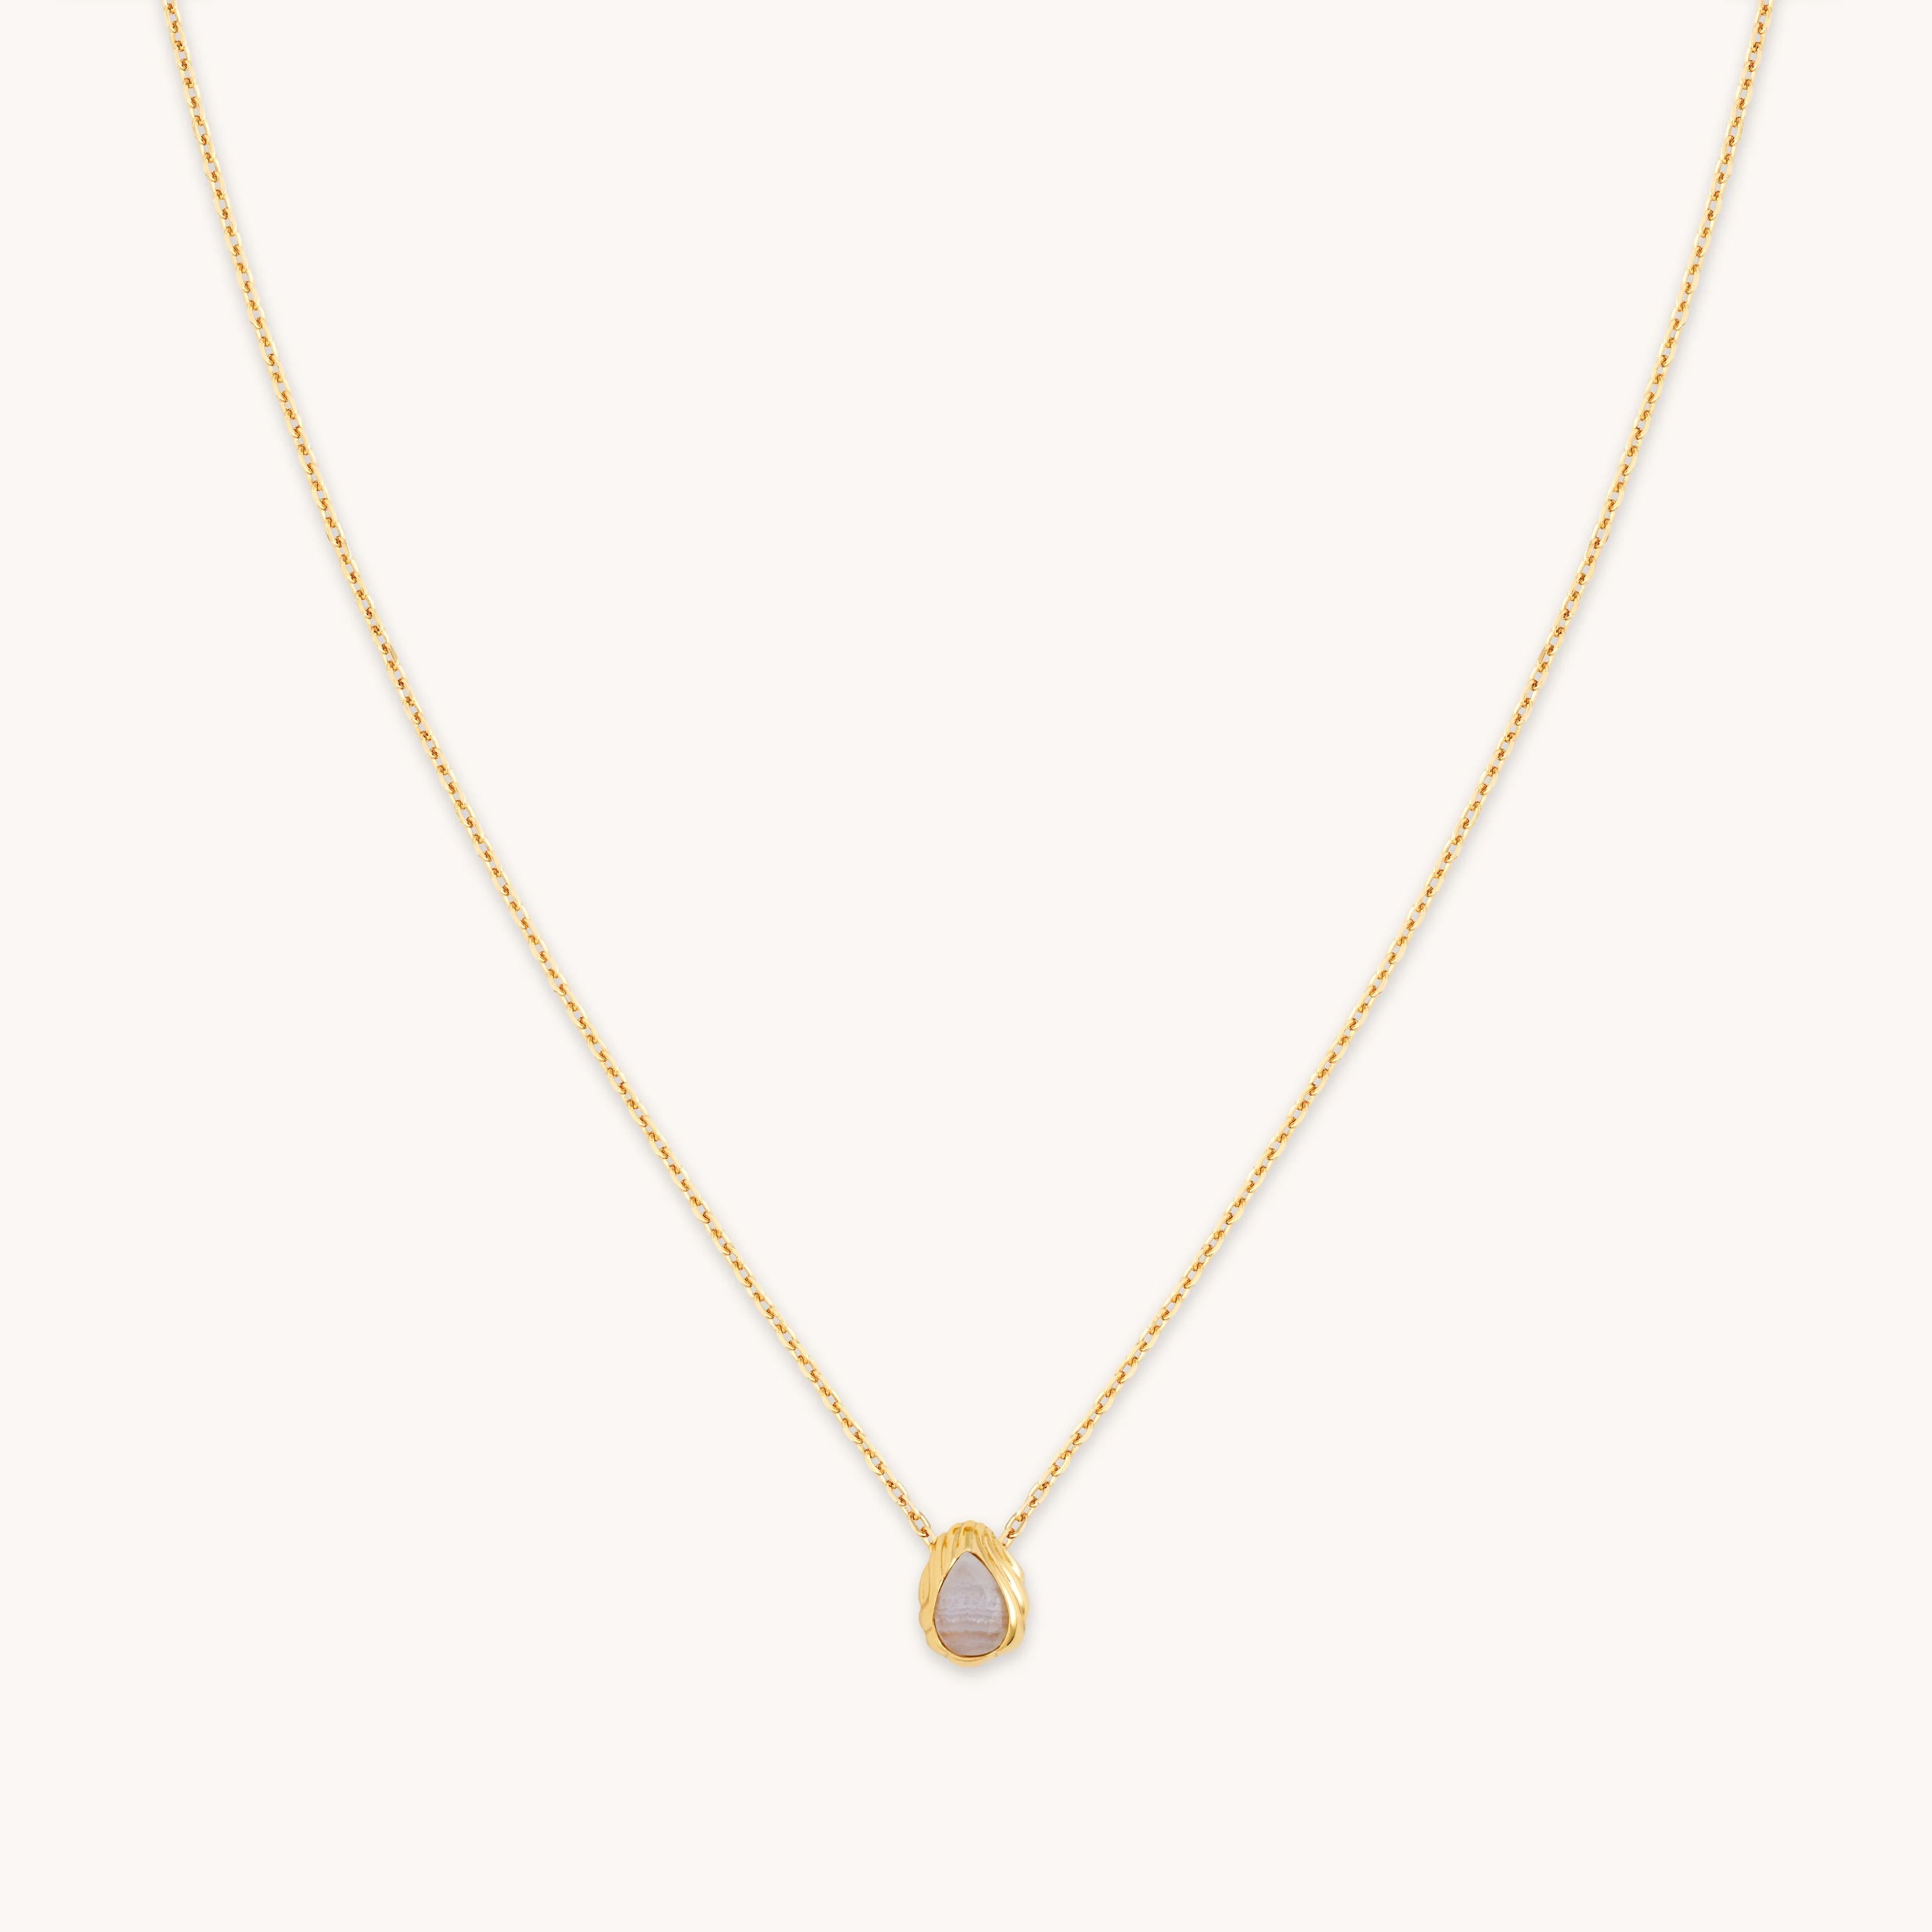 Agate Gold Pendant Necklace | Astrid & Miyu Necklaces | Astrid and Miyu